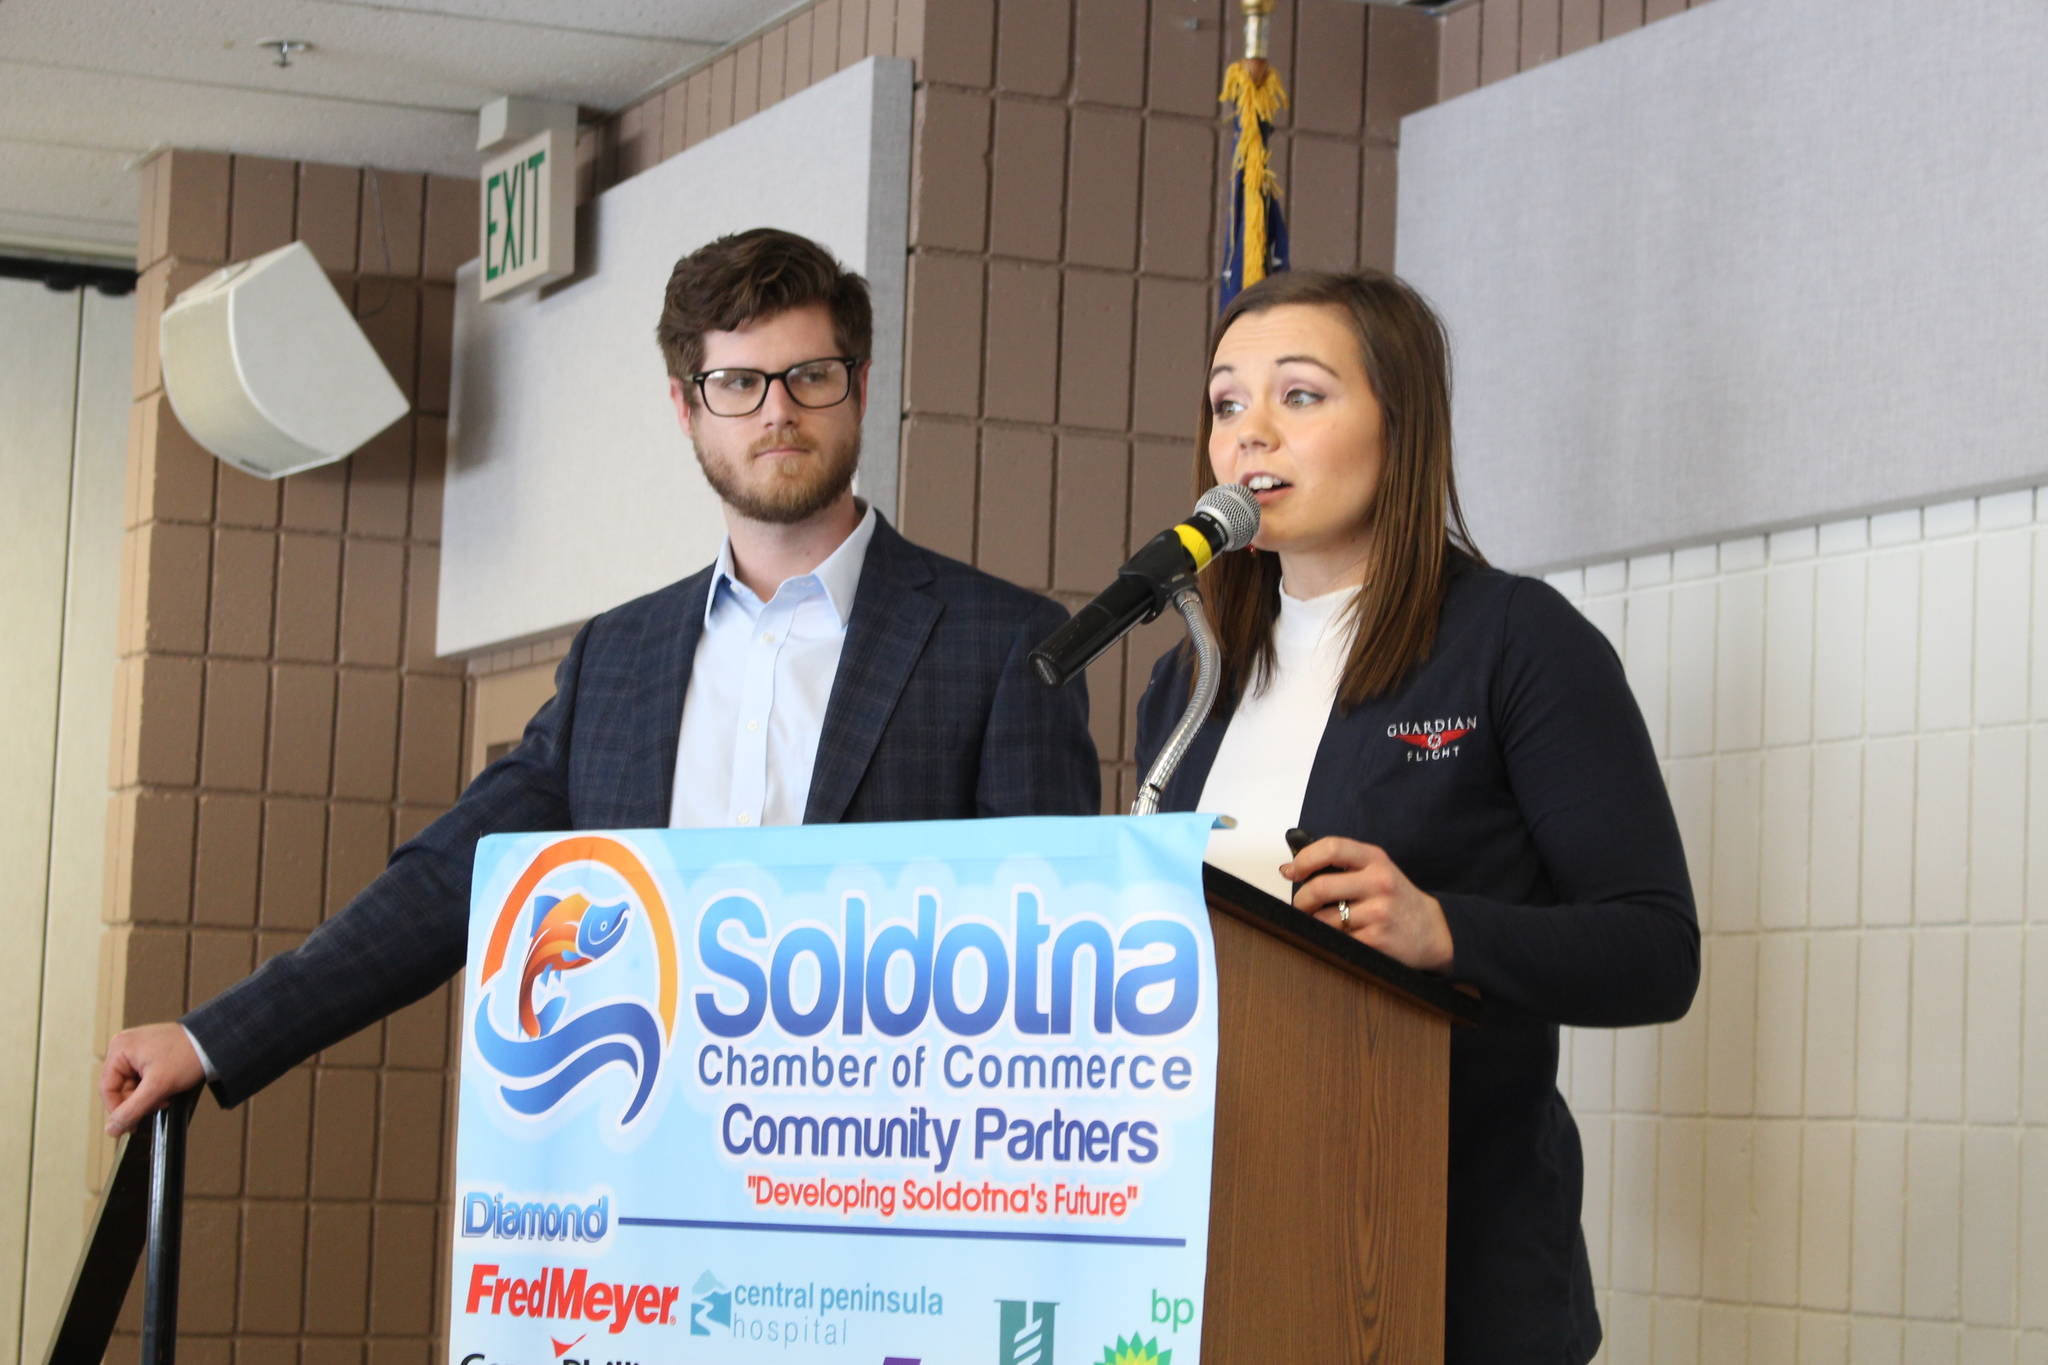 Riley Little, left, and Jessica Hyatt, right, give a presentation on Guardian Flight Alaska to the Soldotna Chamber of Commerce at the Soldotna Sports Complex in Soldotna, Alaska on Wednesday, Feb. 26, 2020. Little is the Membership Sales Manager and Hyatt is the Business Development Specialist for Guardian Flight Alaska. (Photo by Brian Mazurek/Peninsula Clarion)